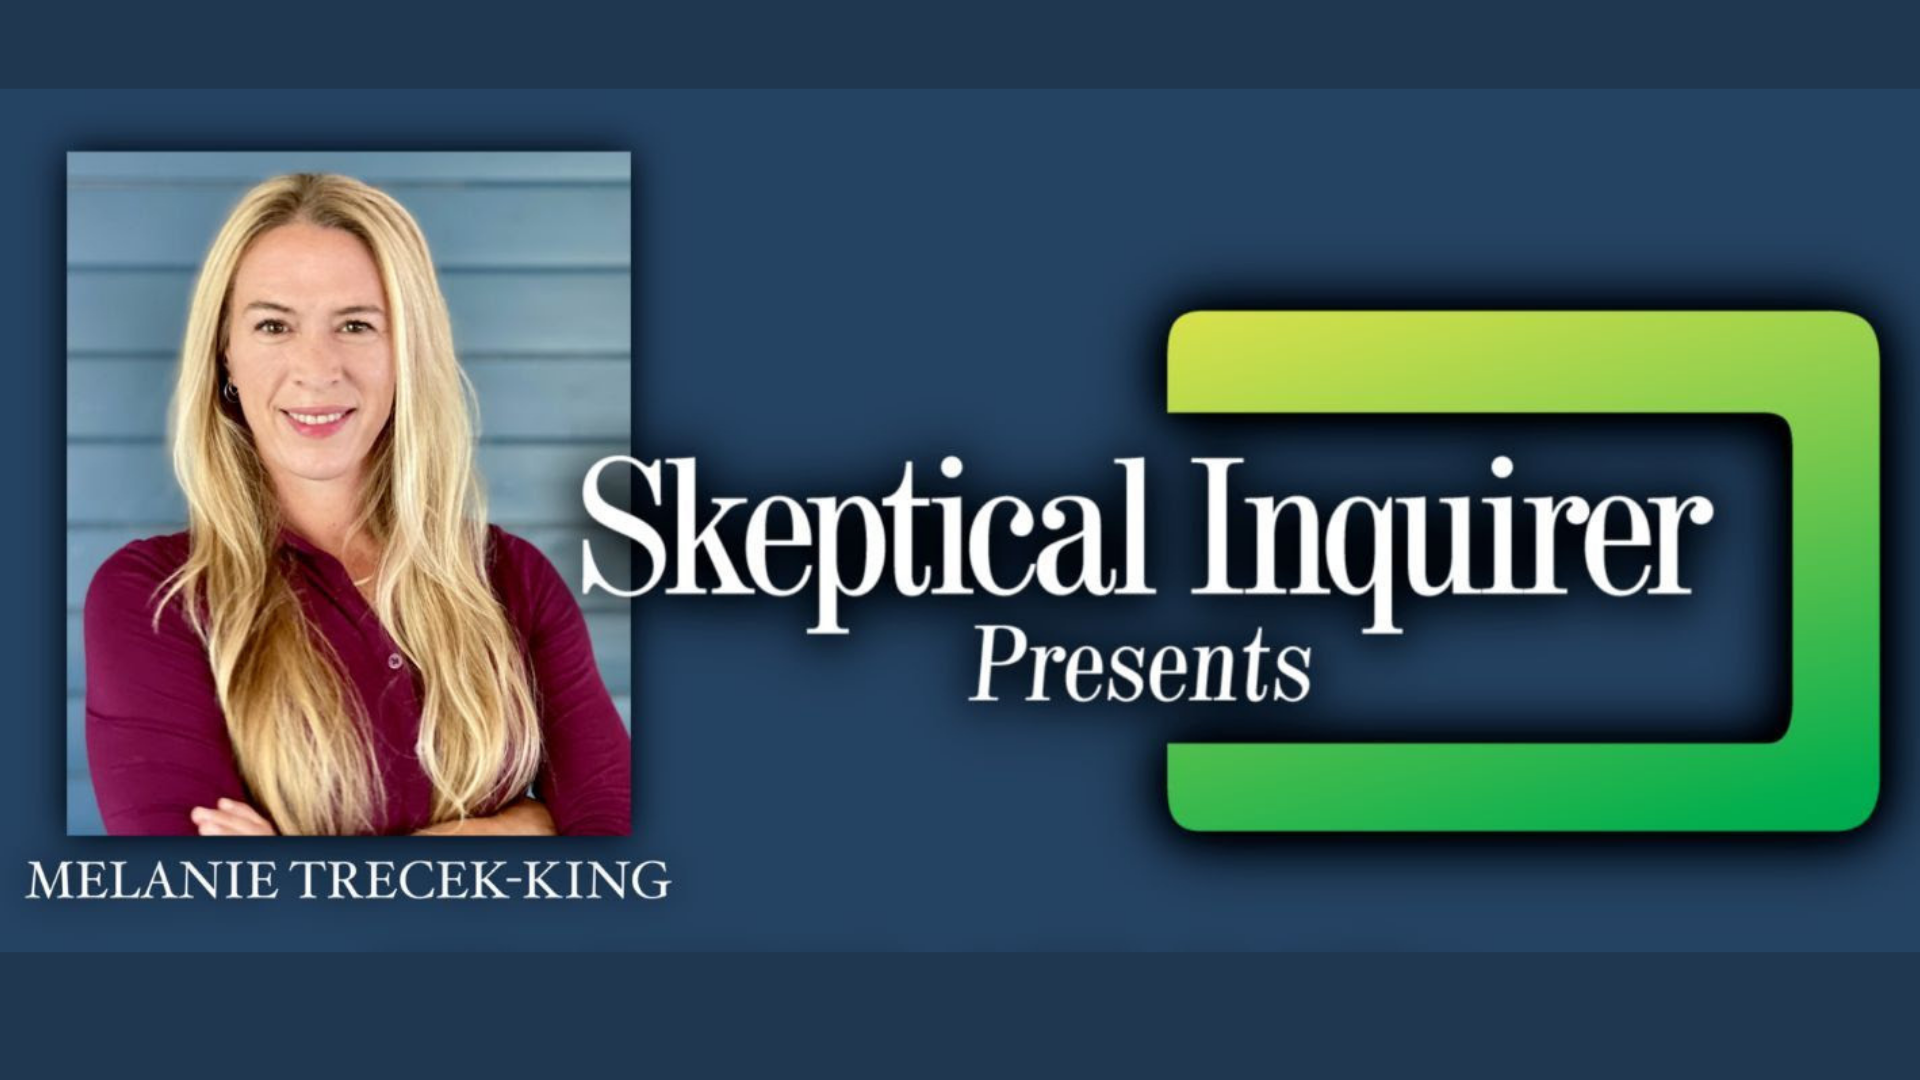 Melanie Trecek-King on Center for Inquiry’s Skeptical Inquirer Presents: A Life Preserver for Staying Afloat in a Sea of Misinformation